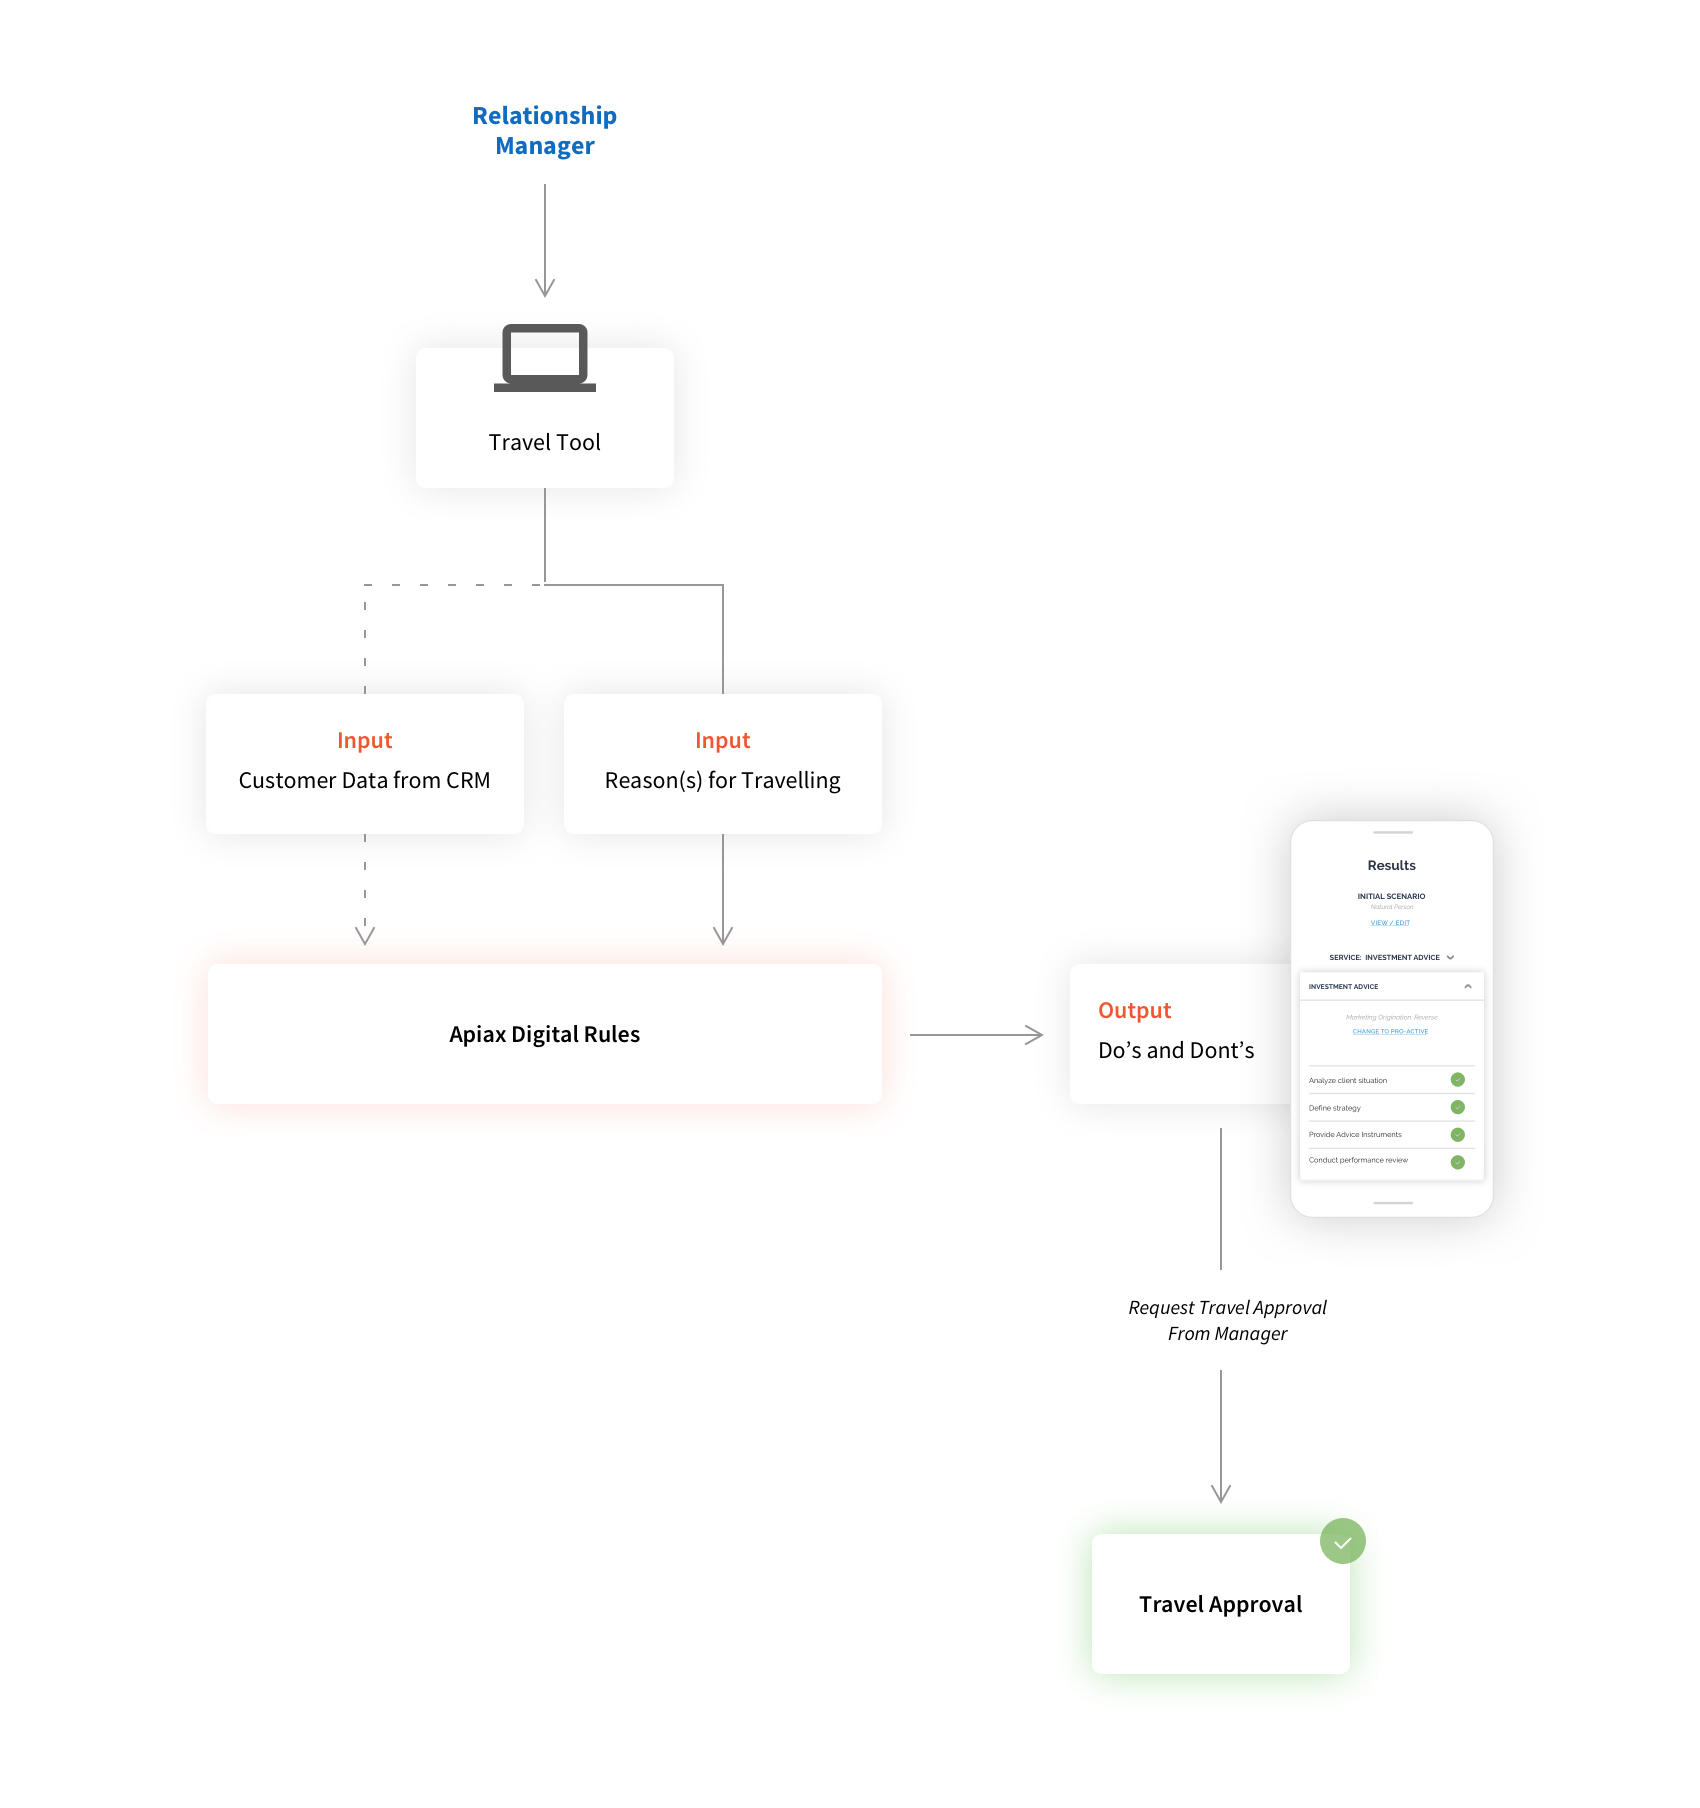 Cross-border interaction compliance use case flow